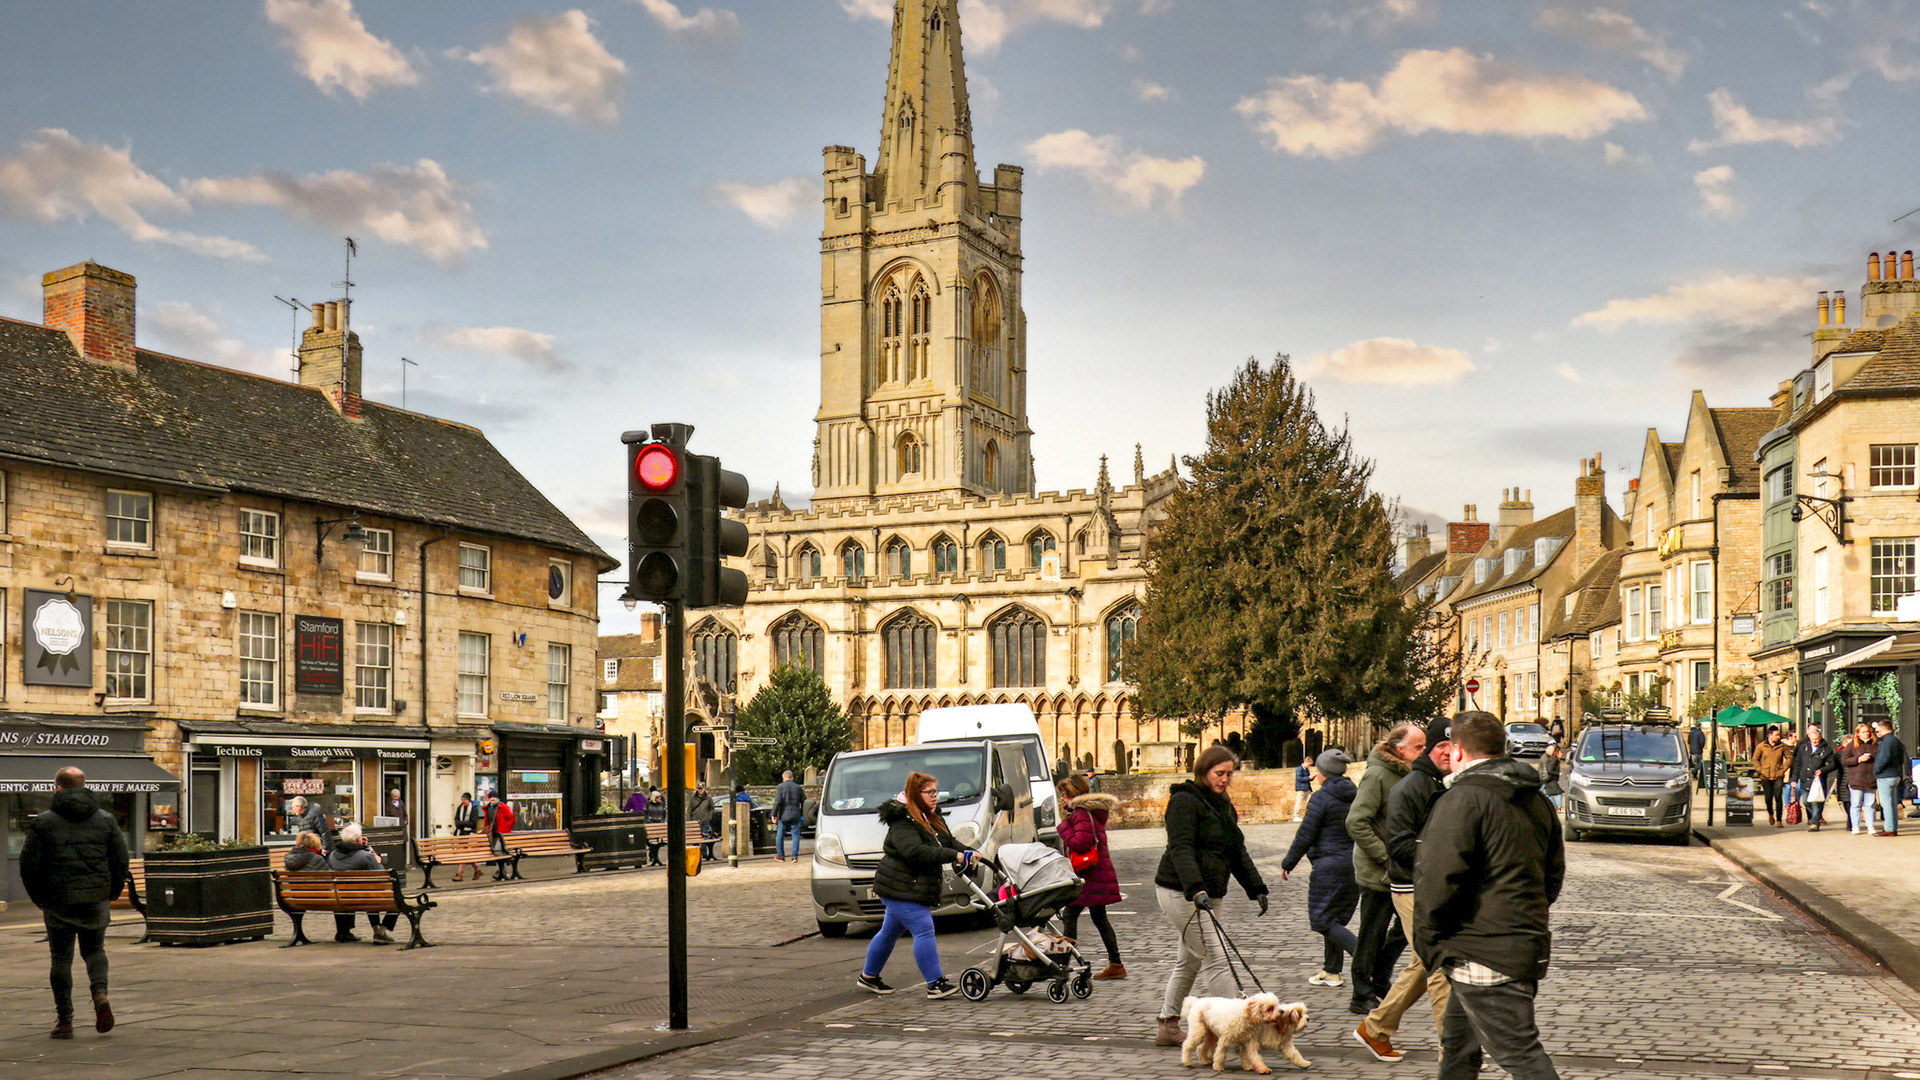 Stamford town centre